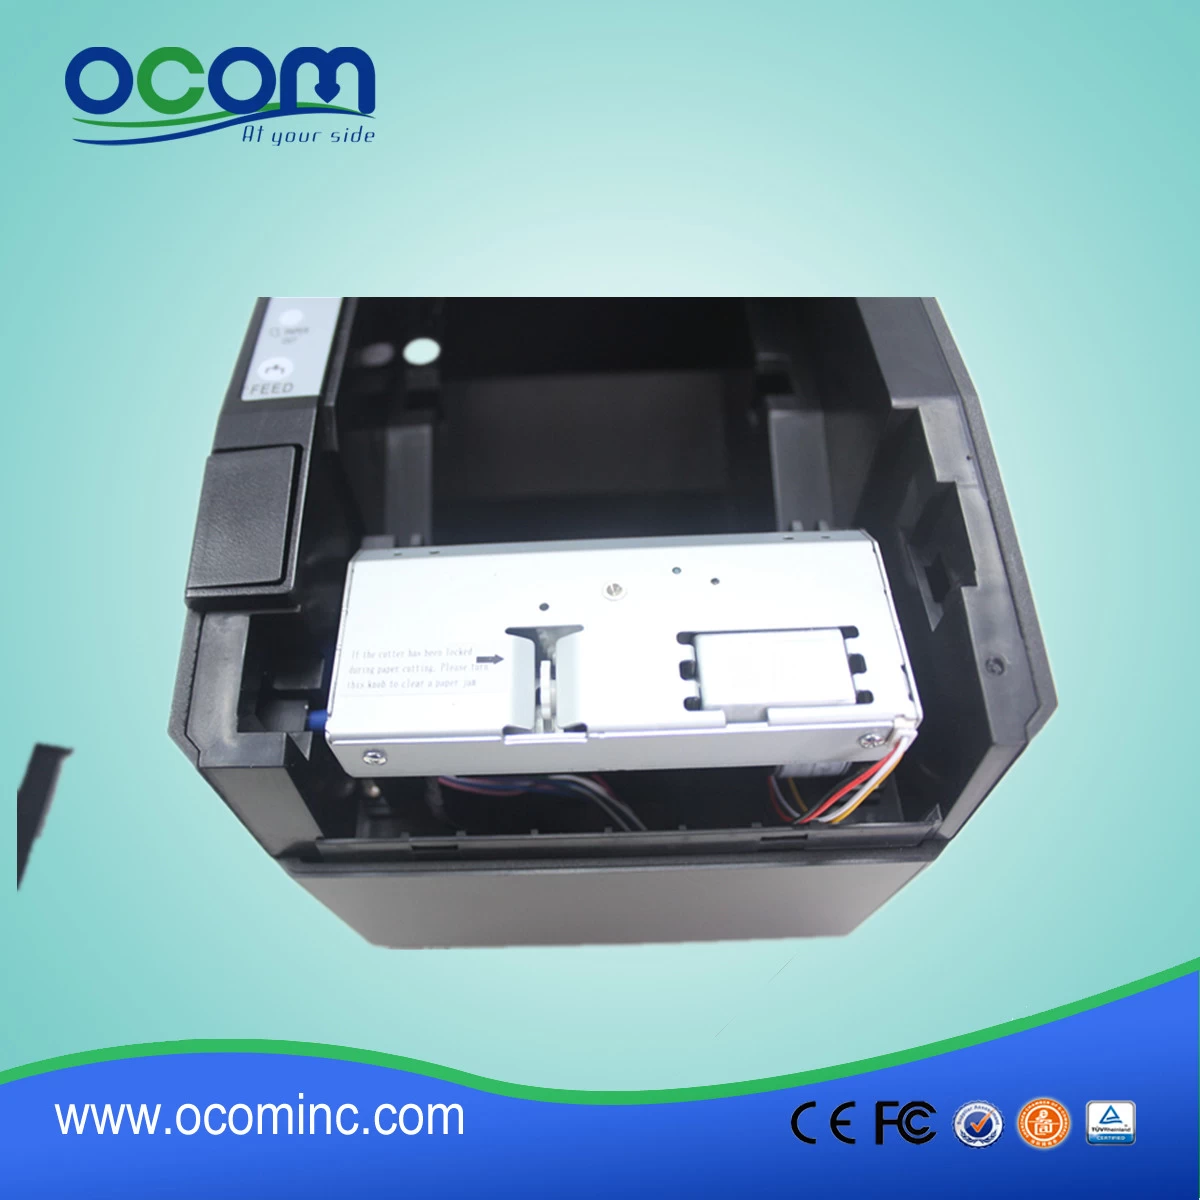 80mm receipt thermal printer with auto cutter for POS application (OCPP-88A)